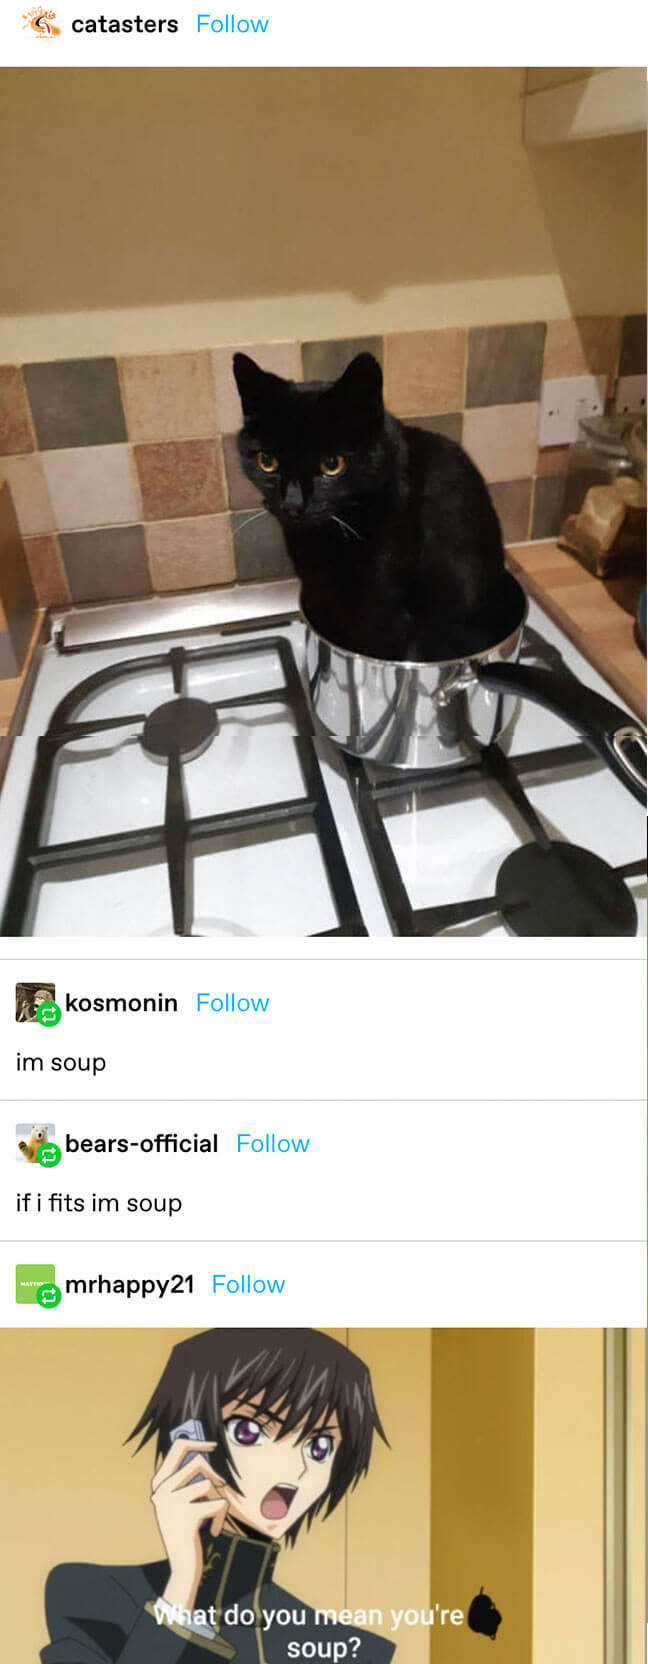 a cat in a pot on the stove with the captions &quot;im soup&quot; and &quot;if it fits im soup,&quot; with a meme of an anime character saying &quot;what do you mean you&#x27;re soup?&quot;